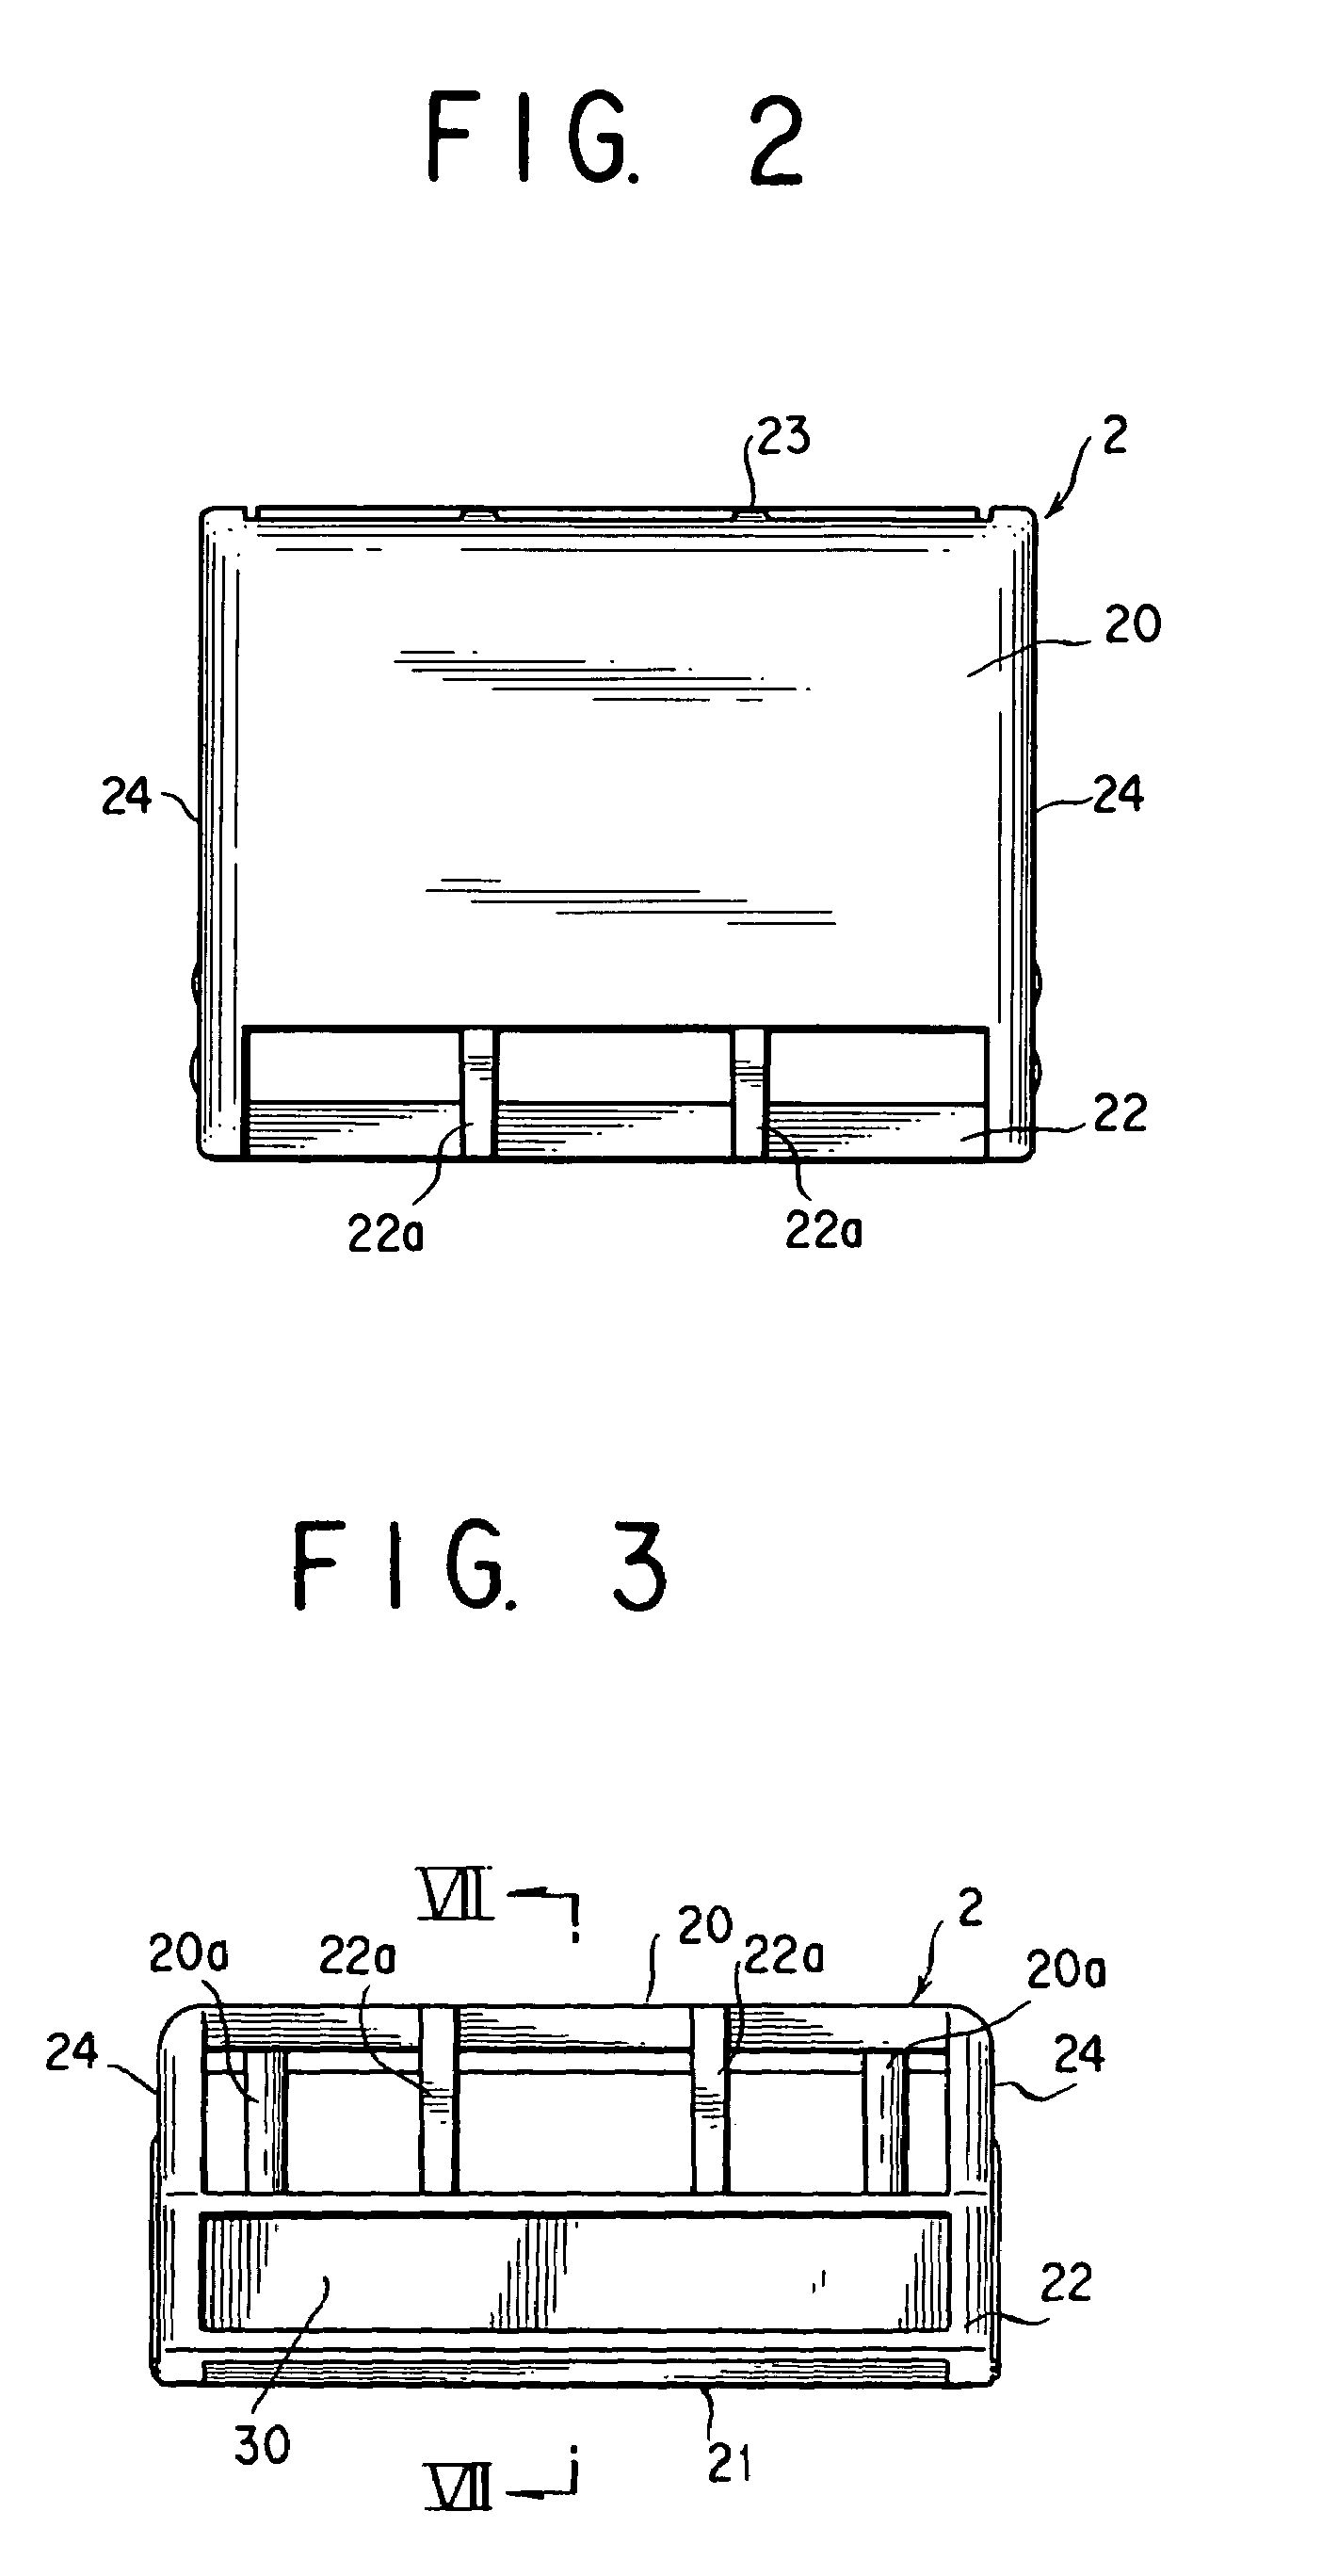 Chemical-containing formed material of type of heating of whole the material, container for holding chemical-containing formed material, device for heating and transpiring chemical and indicator for chemical to be heated and vaporized